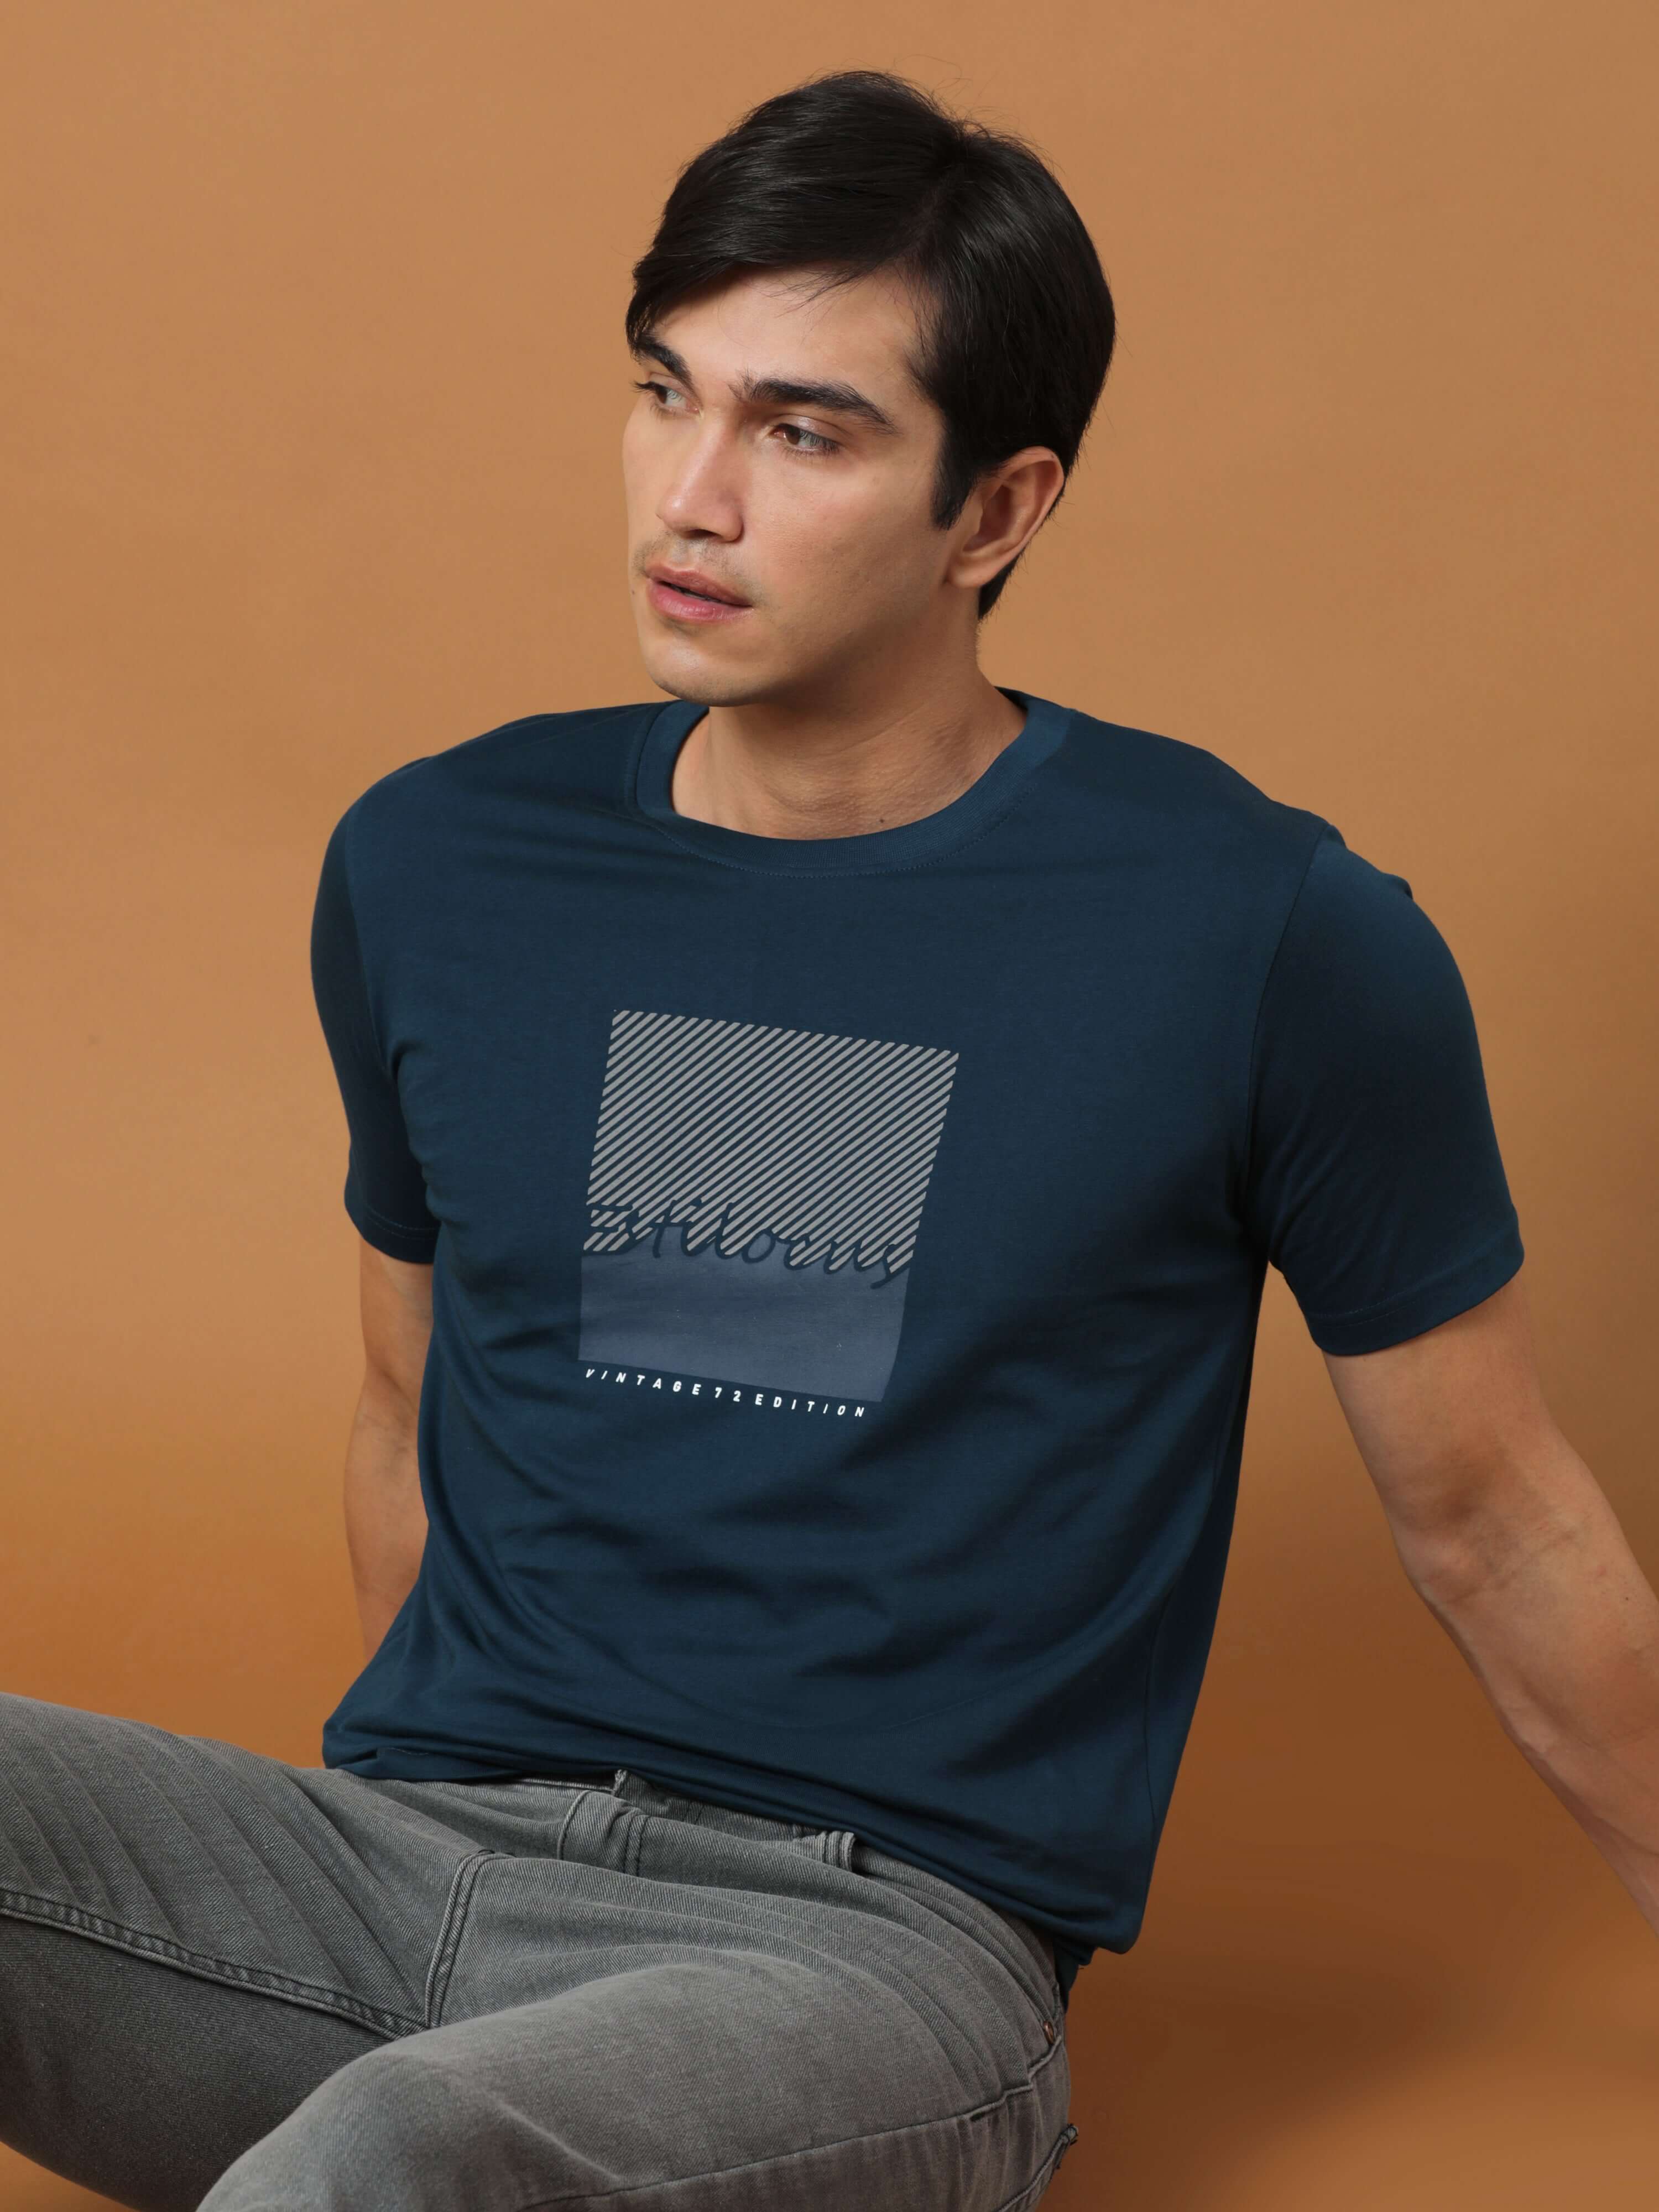 Teal Blue Vintage 72 Edition T Shirt shop online at Estilocus. 100% Cotton Designed and printed on knitted fabric. The fabric is stretchy and lightweight, with a soft skin feel and no wrinkles. Crew neck collar which is smooth on the neck and keeps you co